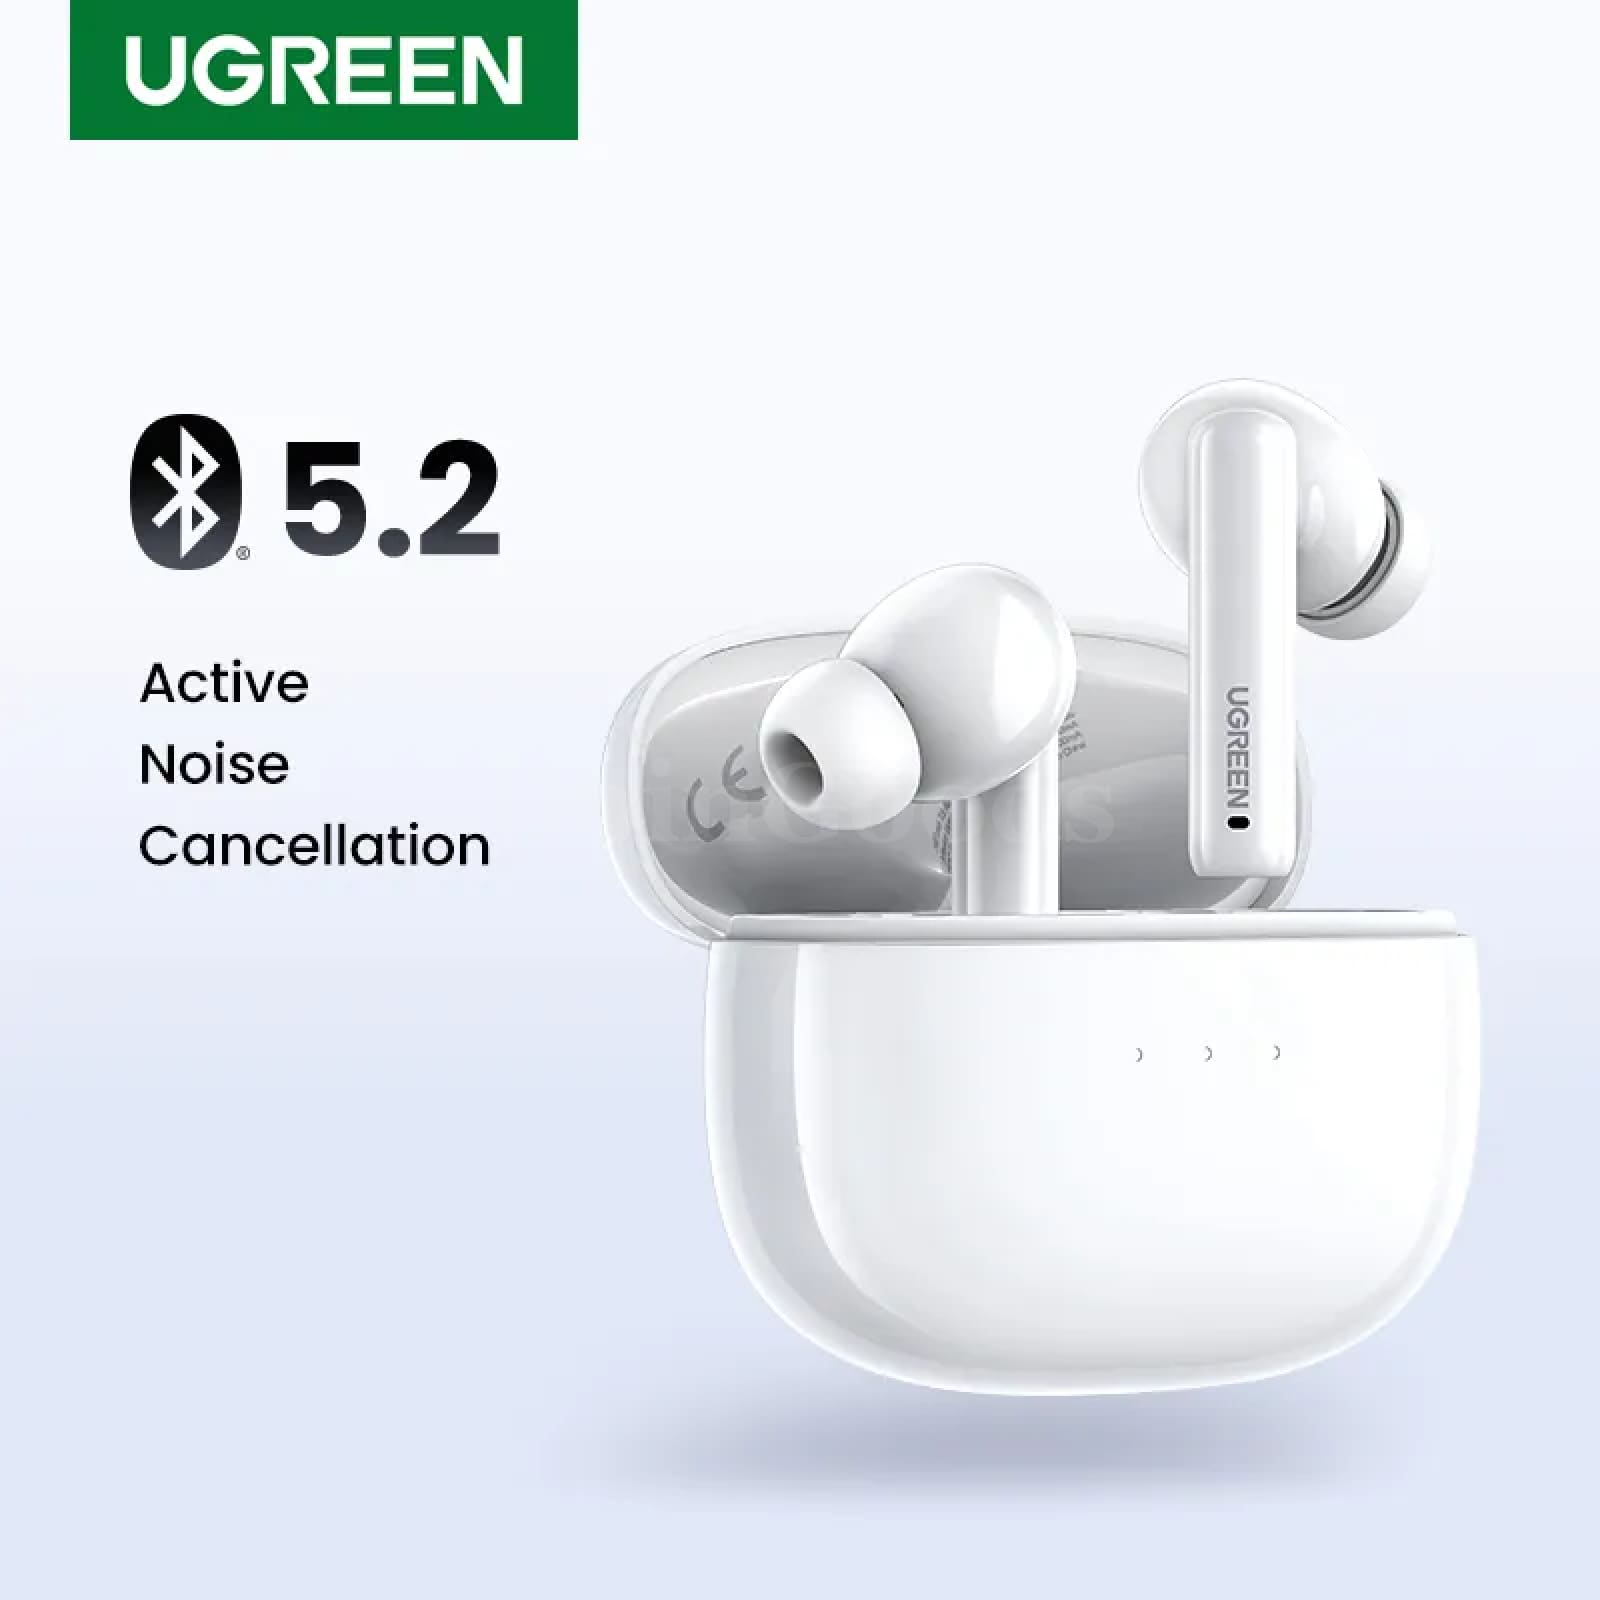 Ugreen Wireless Earbuds Tws Anc Bluetooth 5.2 Transparency Mode 24 Hours Play 301635